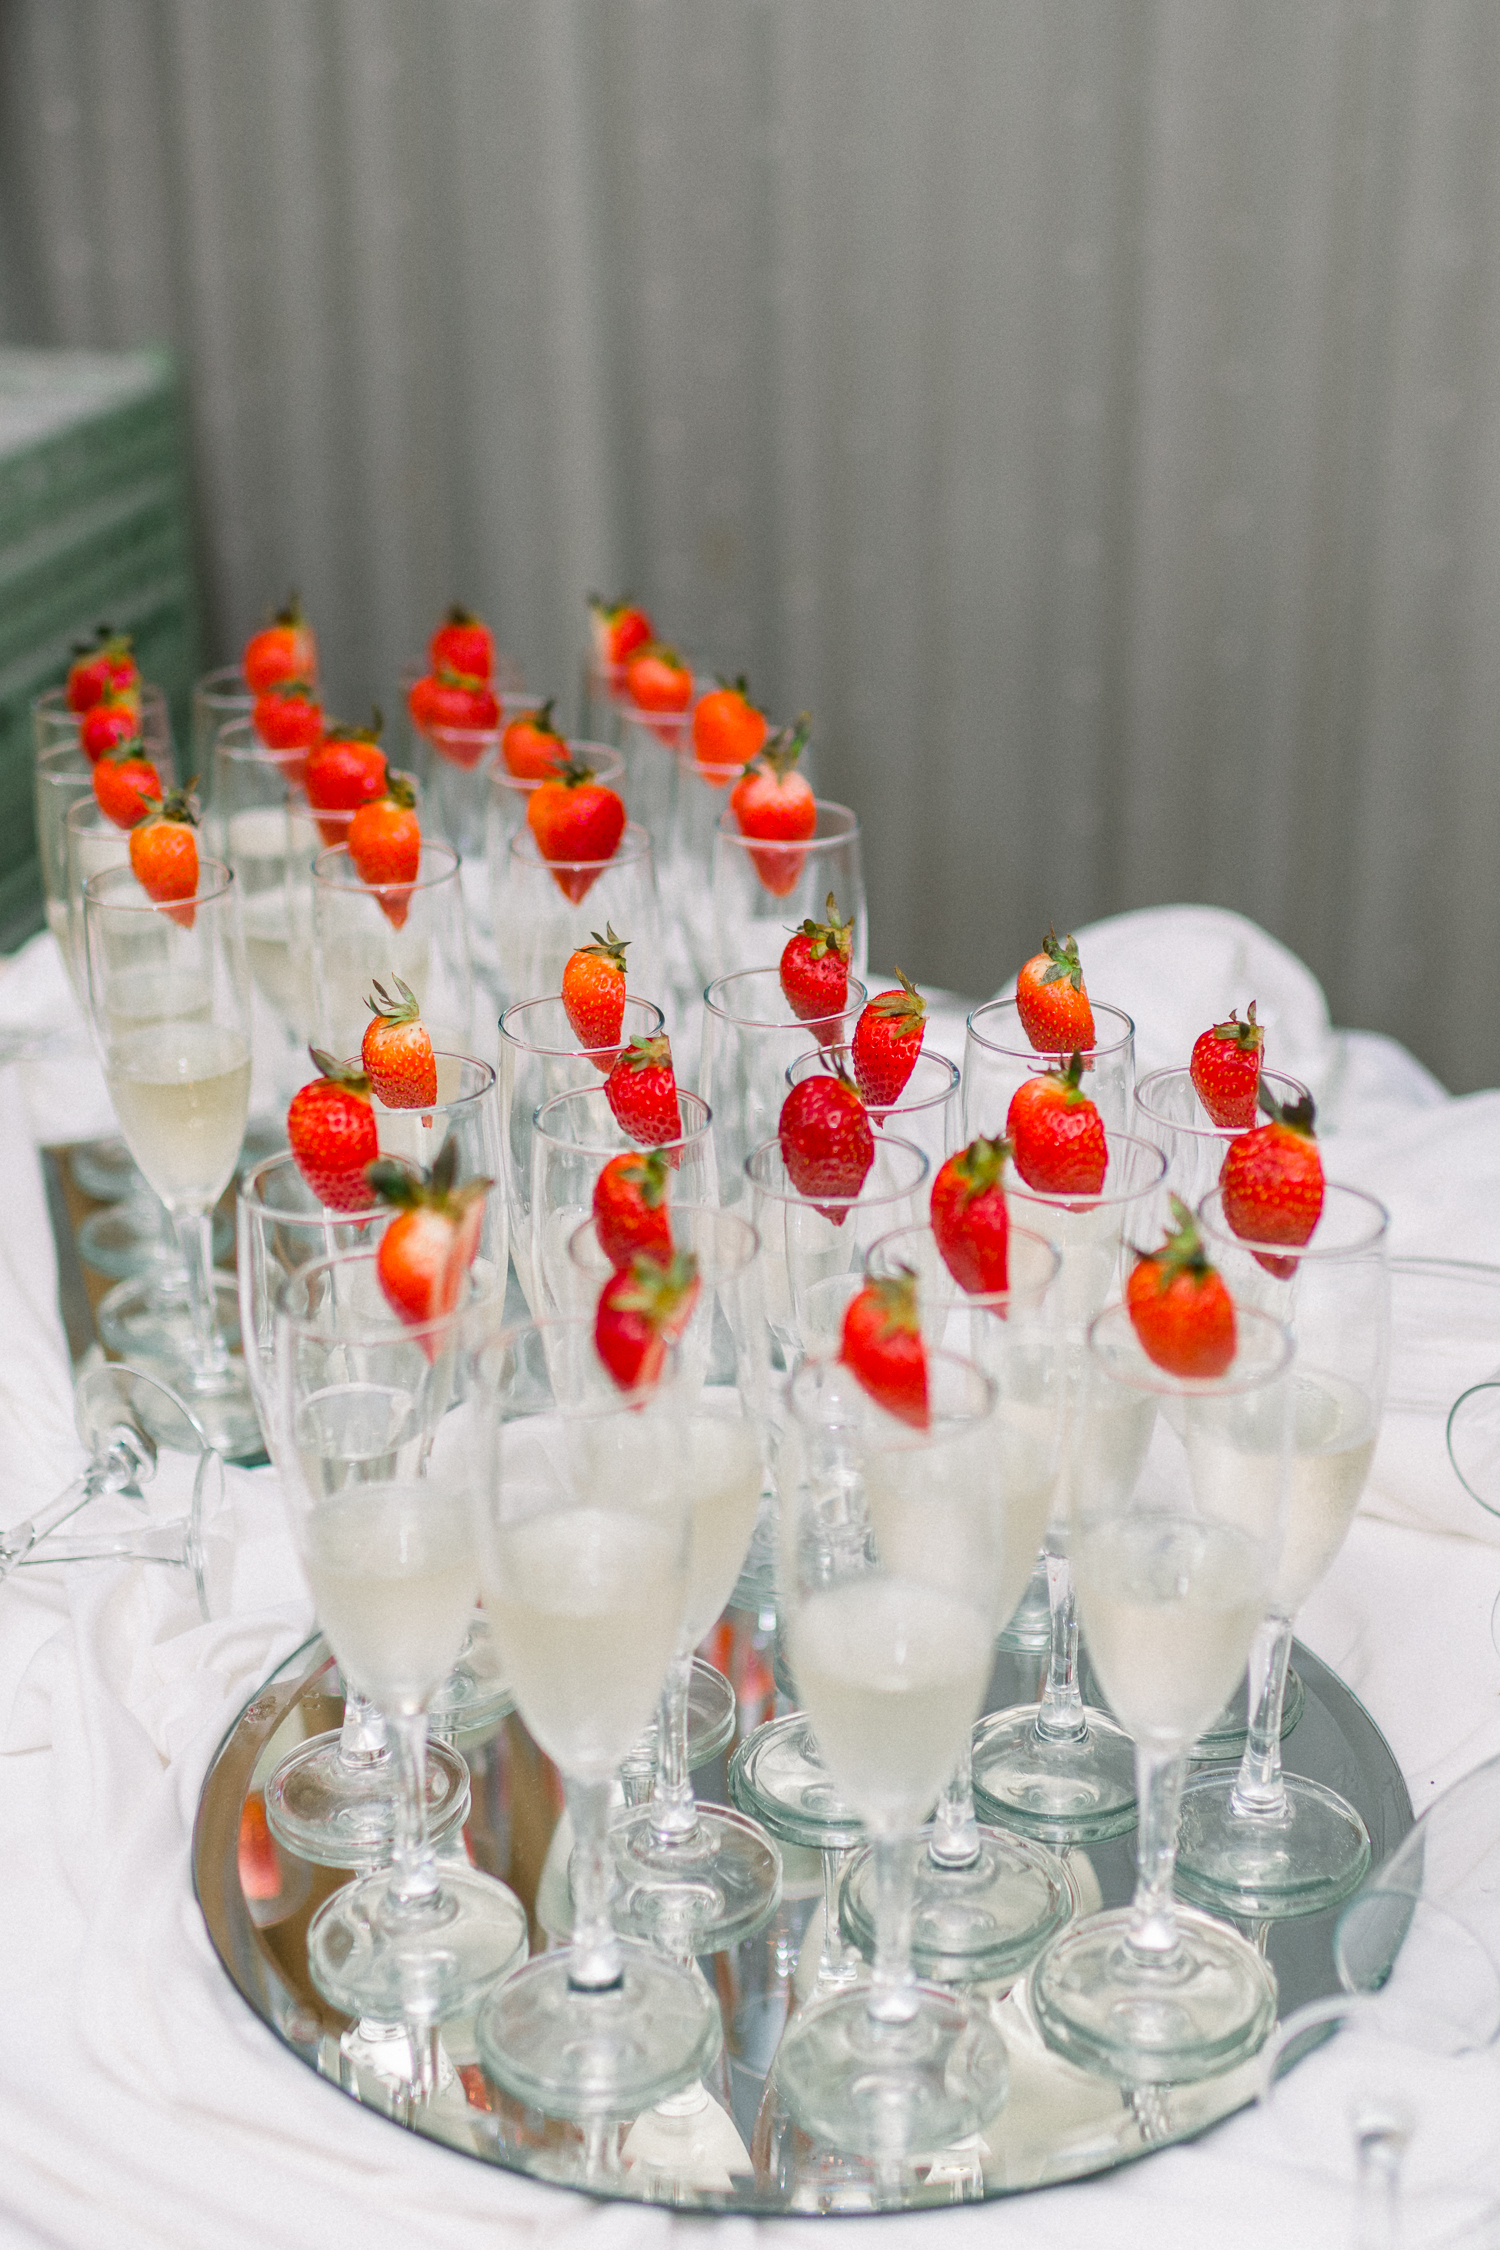 Tray of champagne garnished with cut strawberries